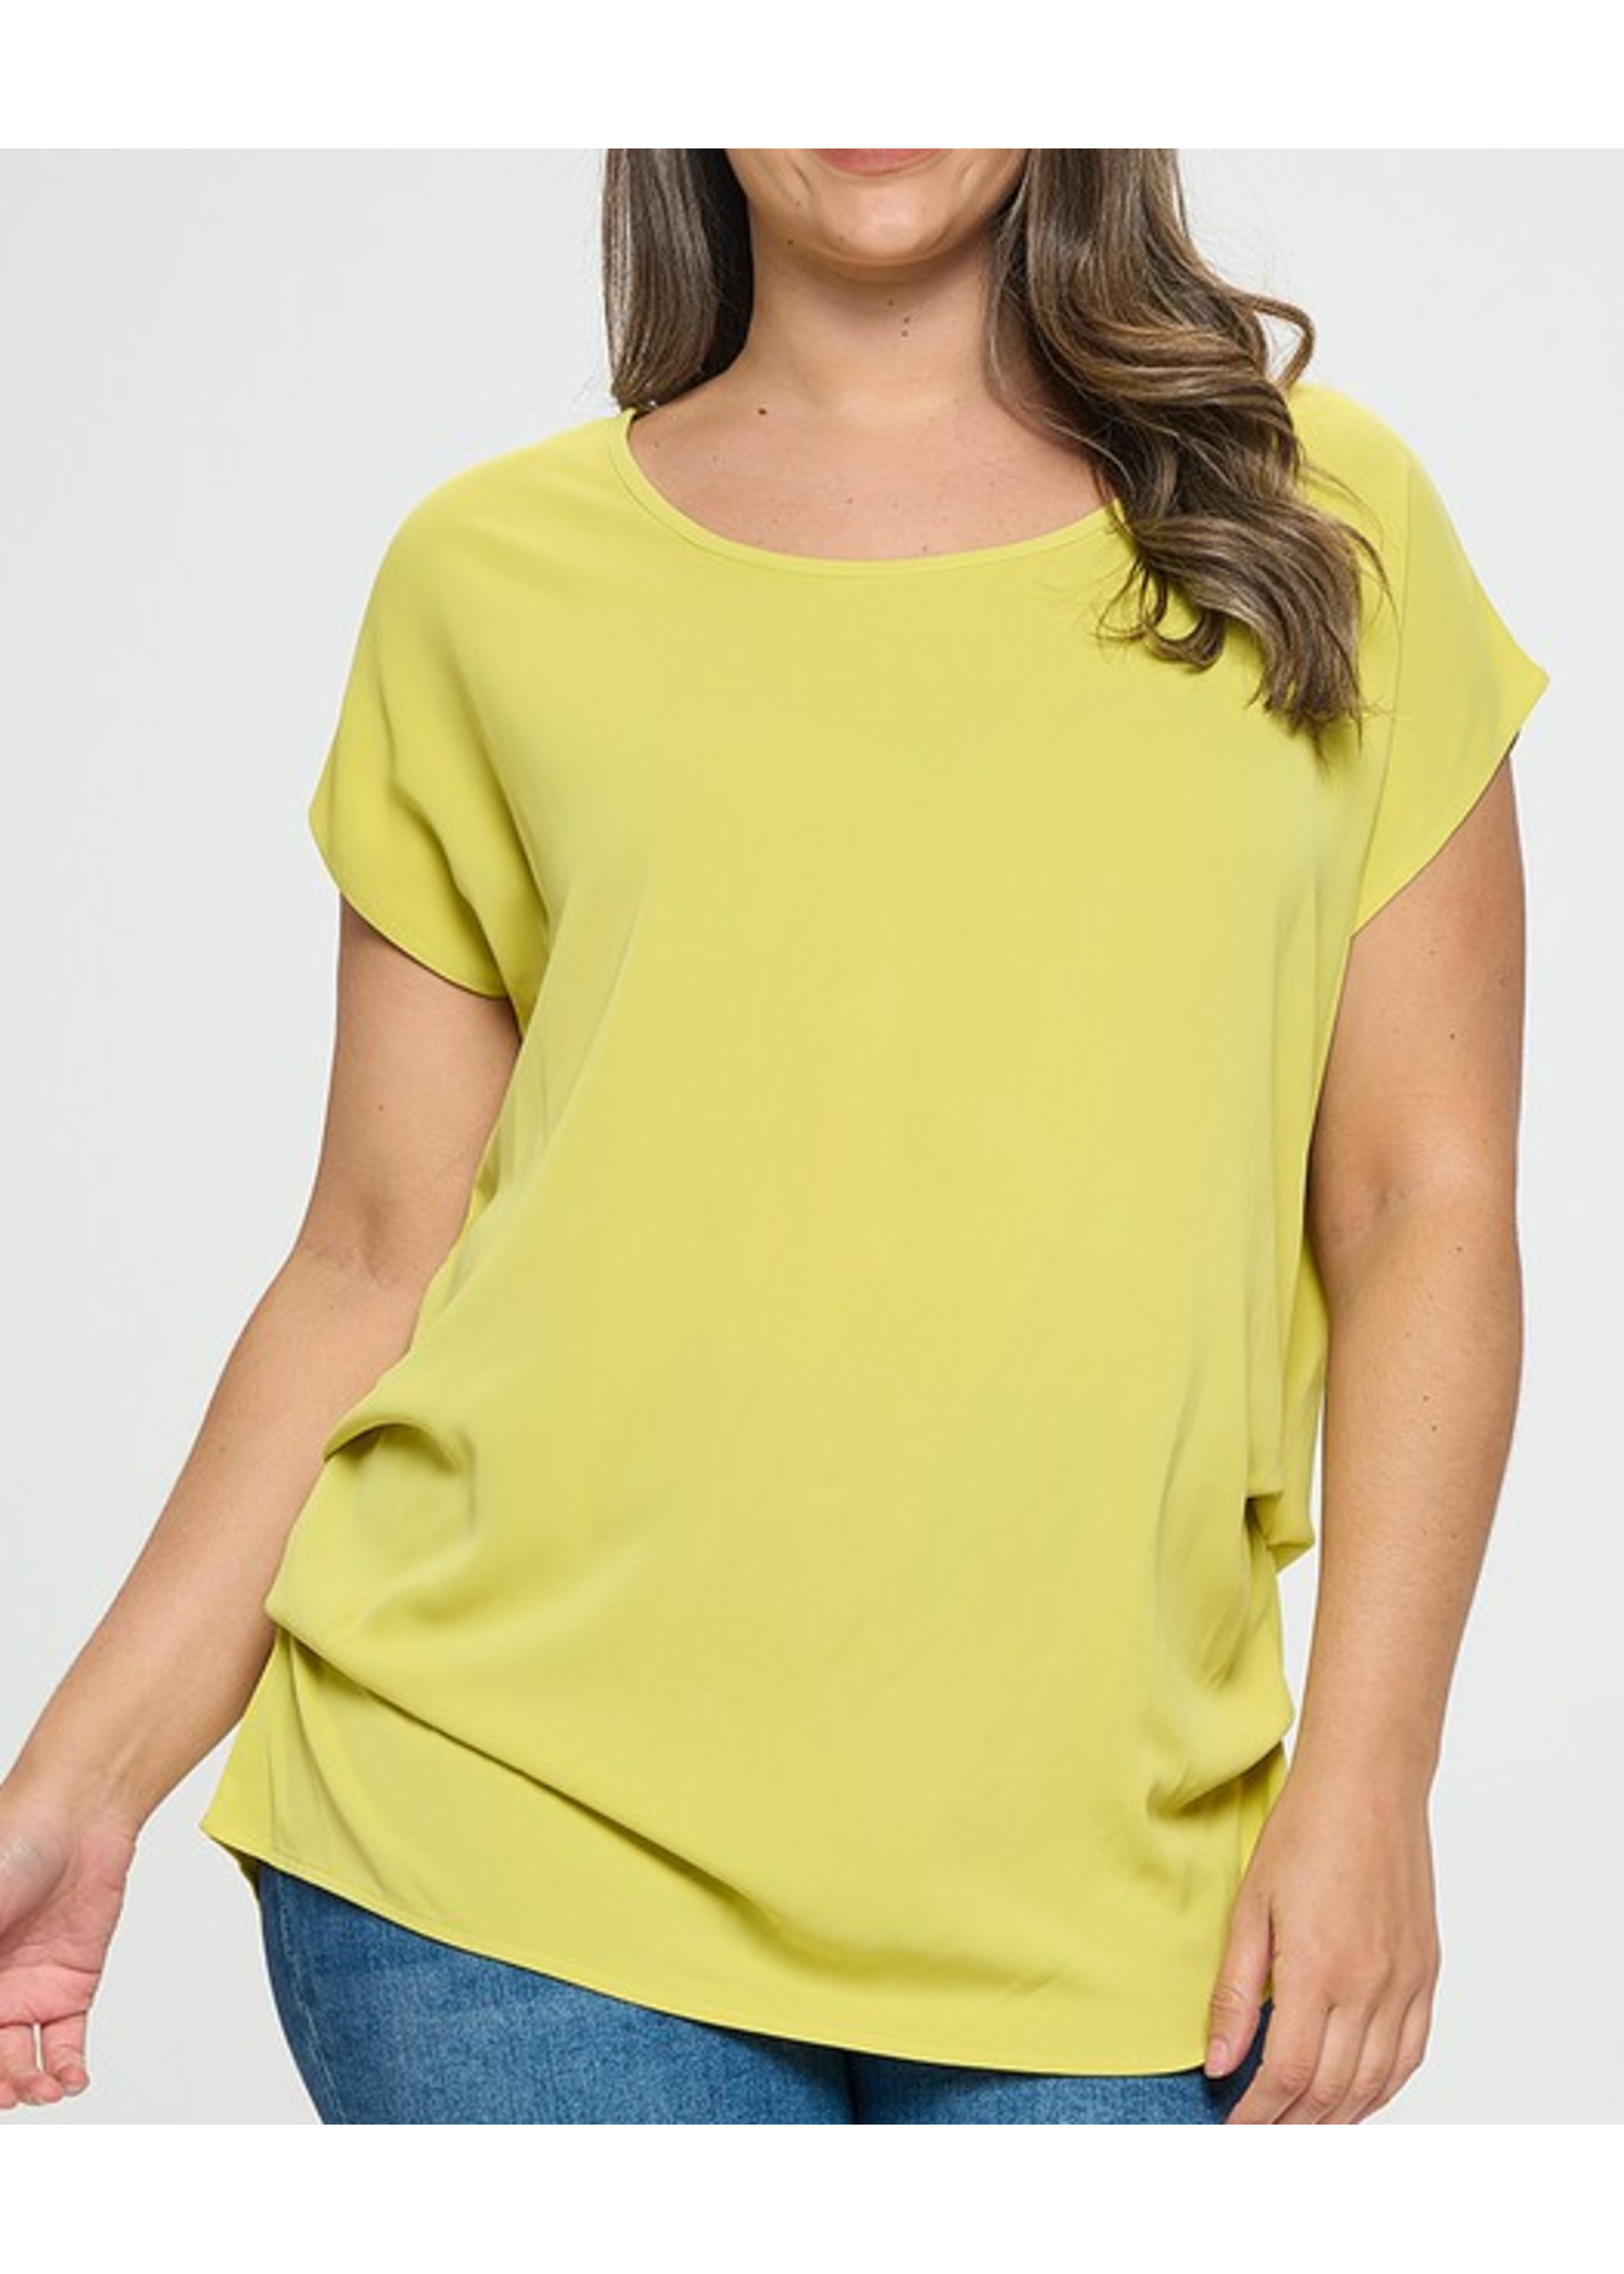 TPIT5531 - PLUS RELACED FIT TOP W SIDE RUCHED DETAIL